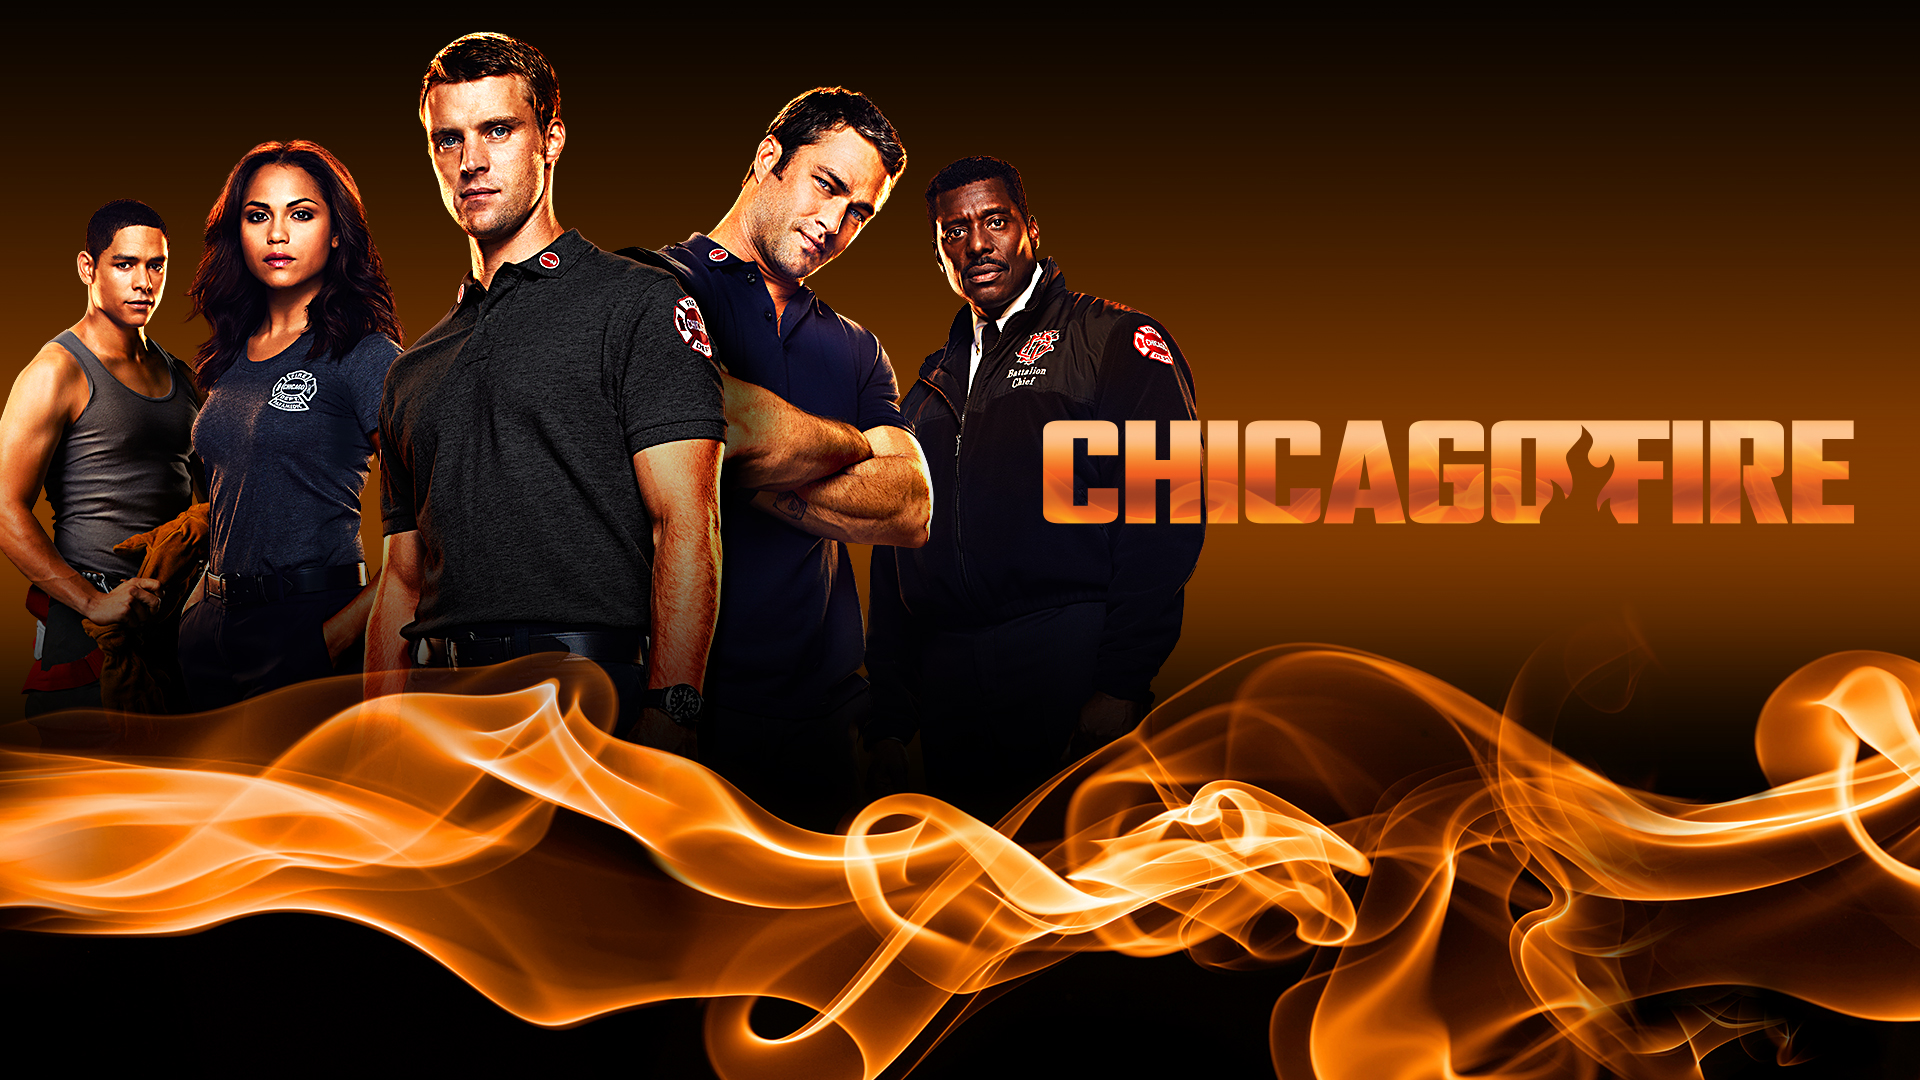 Amazing Chicago Fire Pictures & Backgrounds